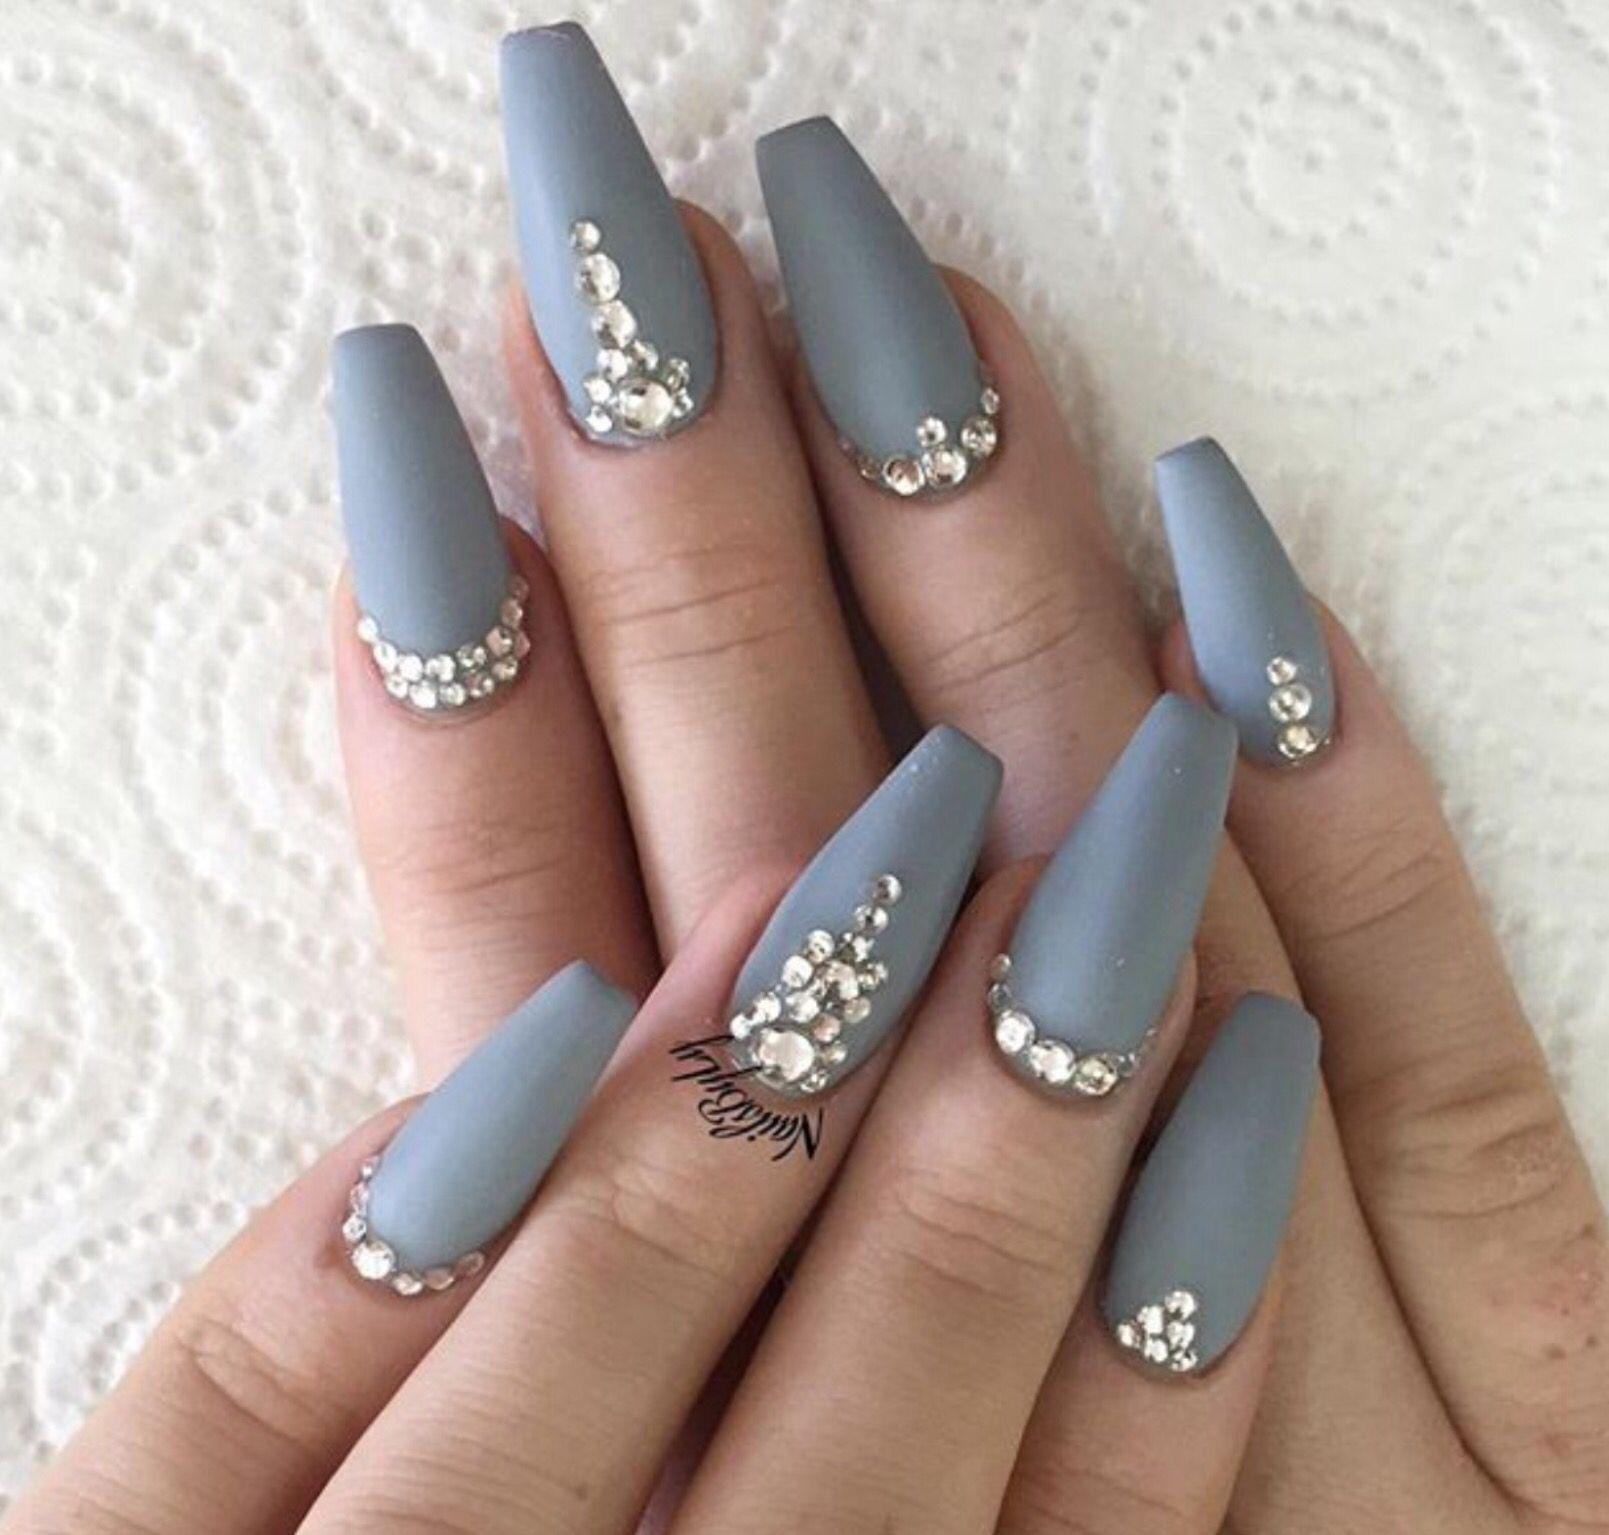 Nail Designs With Jewels
 Don t care too much for the jewels but that COLOR is